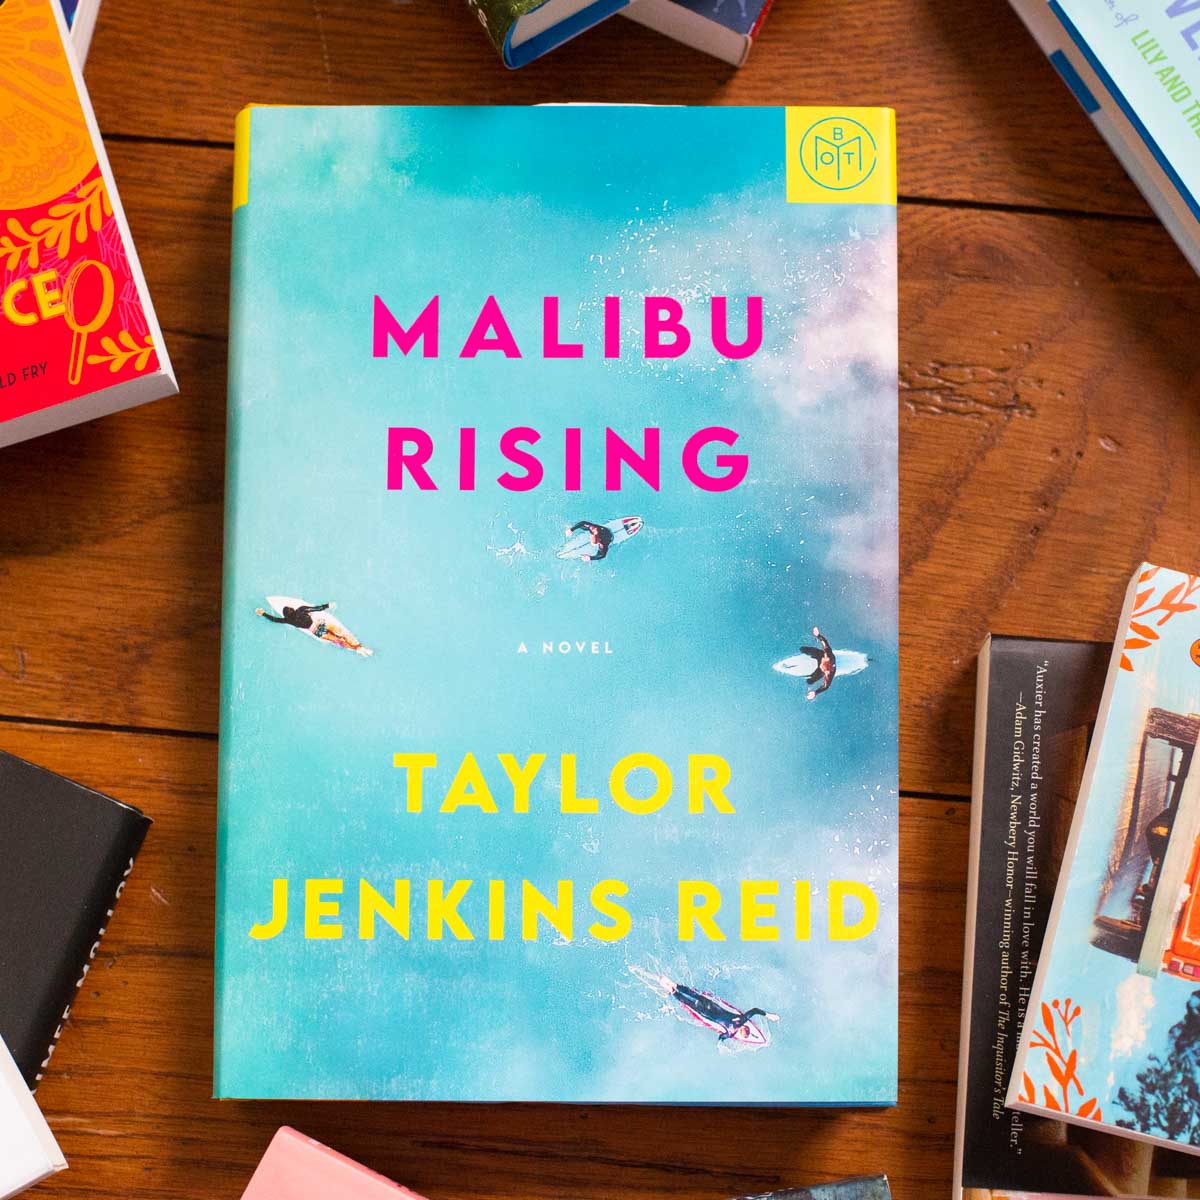 A copy of the book Malibu Rising is on the table.